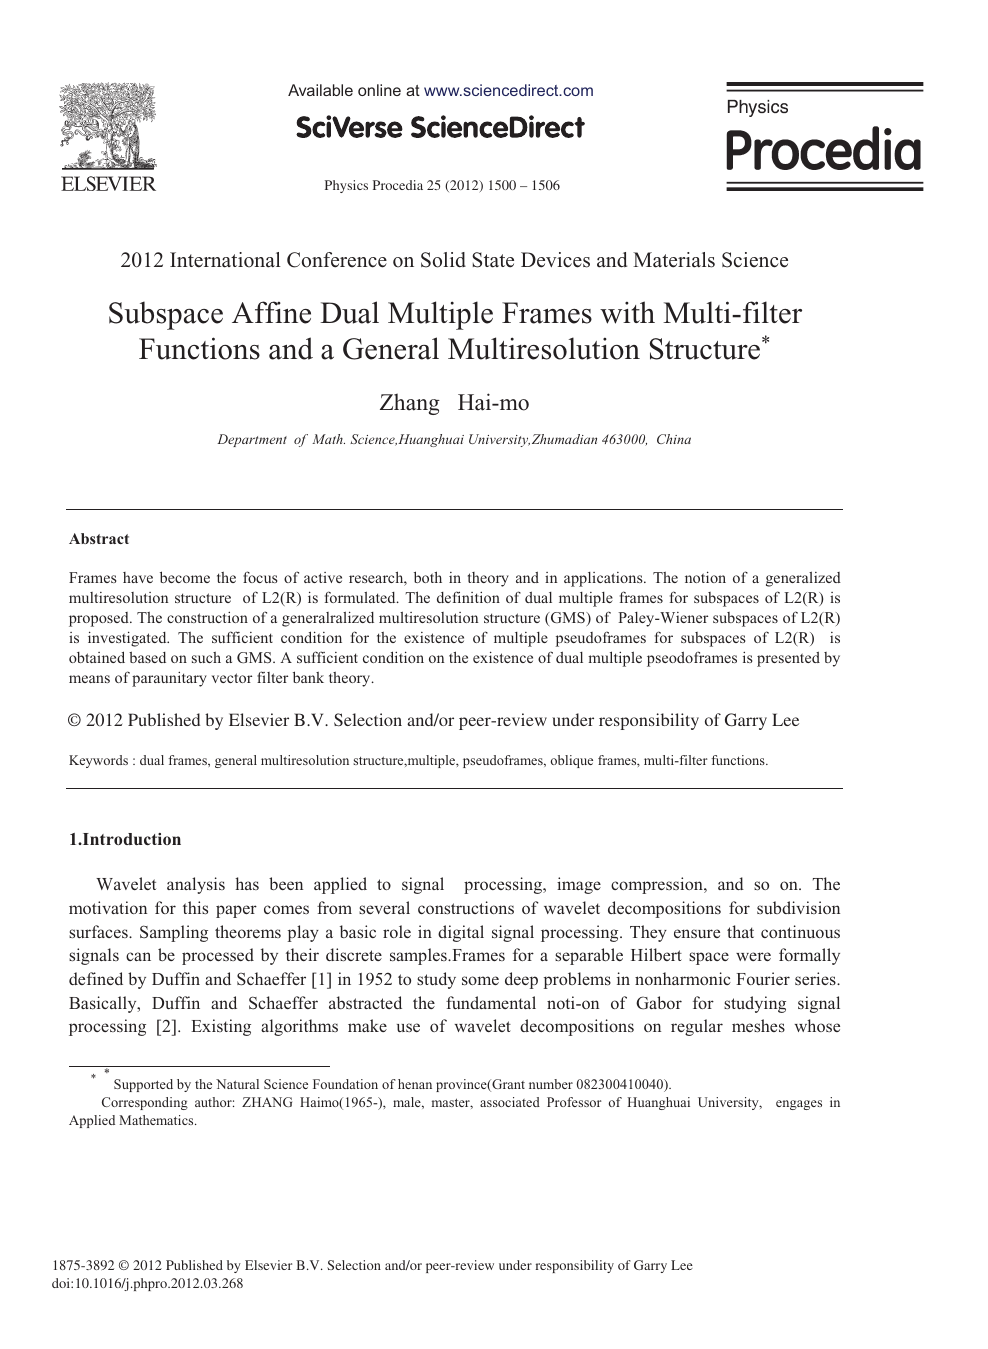 Subspace Affine Dual Multiple Frames With Multi Filter Functions And A General Multiresolution Structure Topic Of Research Paper In Mathematics Download Scholarly Article Pdf And Read For Free On Cyberleninka Open Science